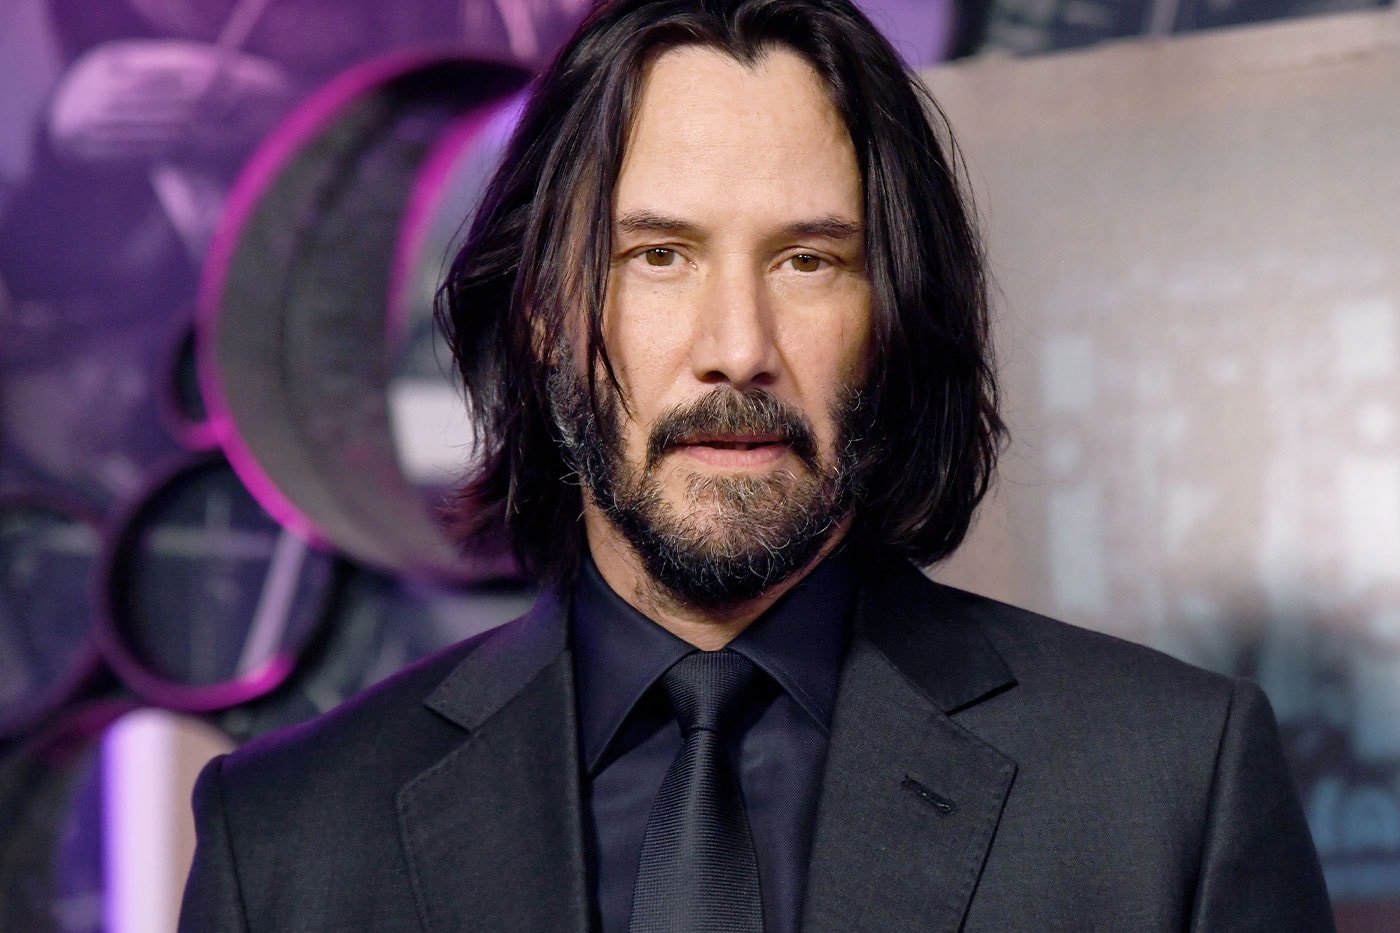 Keanu Reeves MCU casting rumors Marvel cinematic universe i would be honored Esquire birthday tweet kevin Feige Marvel Studios talk to him every film news